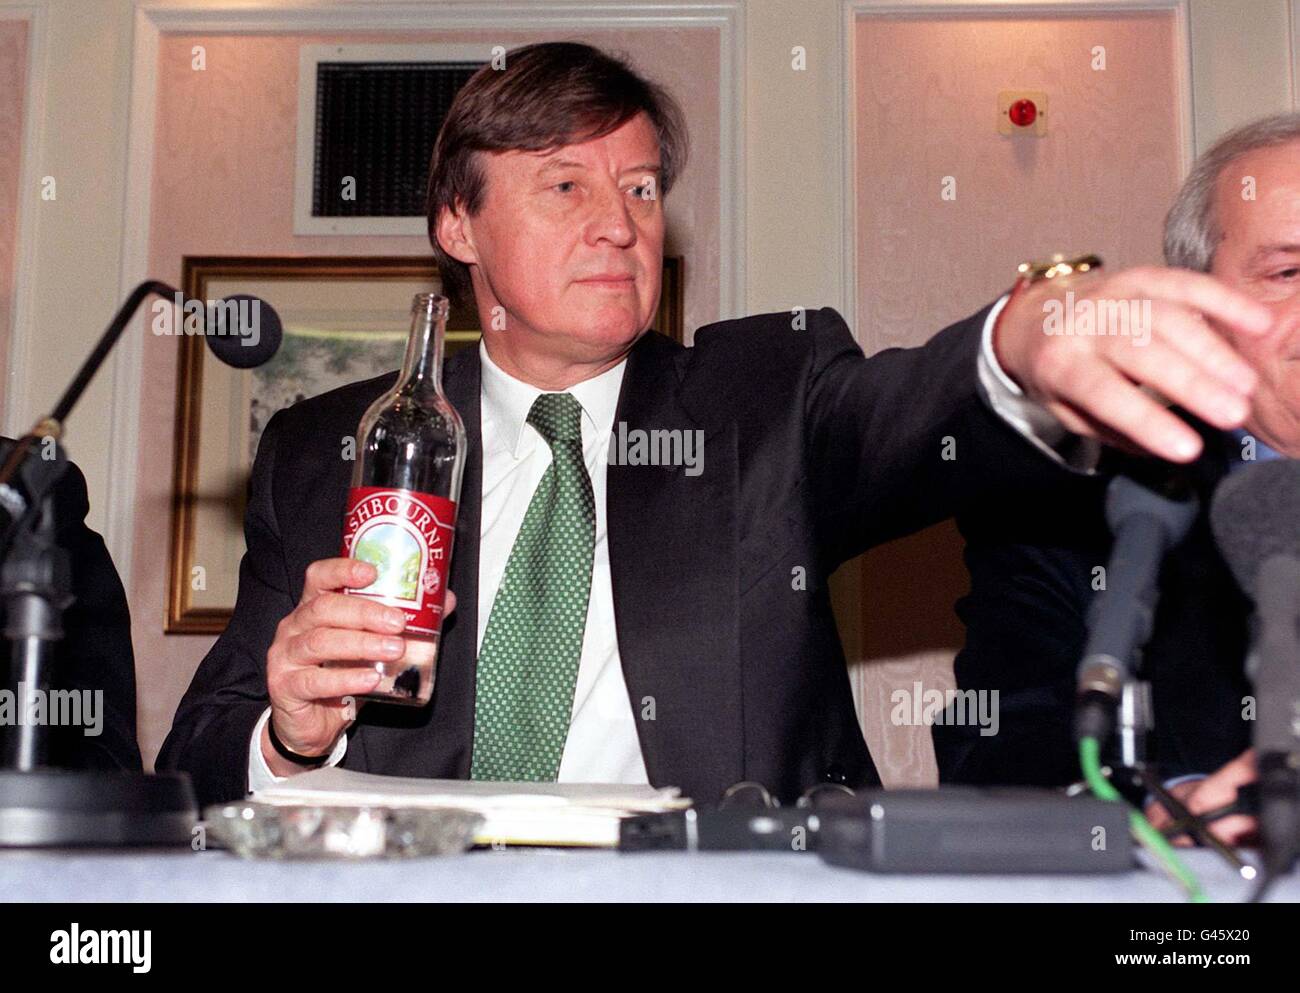 German General Secretary of UEFA Gerhard Aigner reaches for a glass as he  speaks to the press at a meeting today (Friday) at the Kensington Palace  Hotel in London regarding the rival